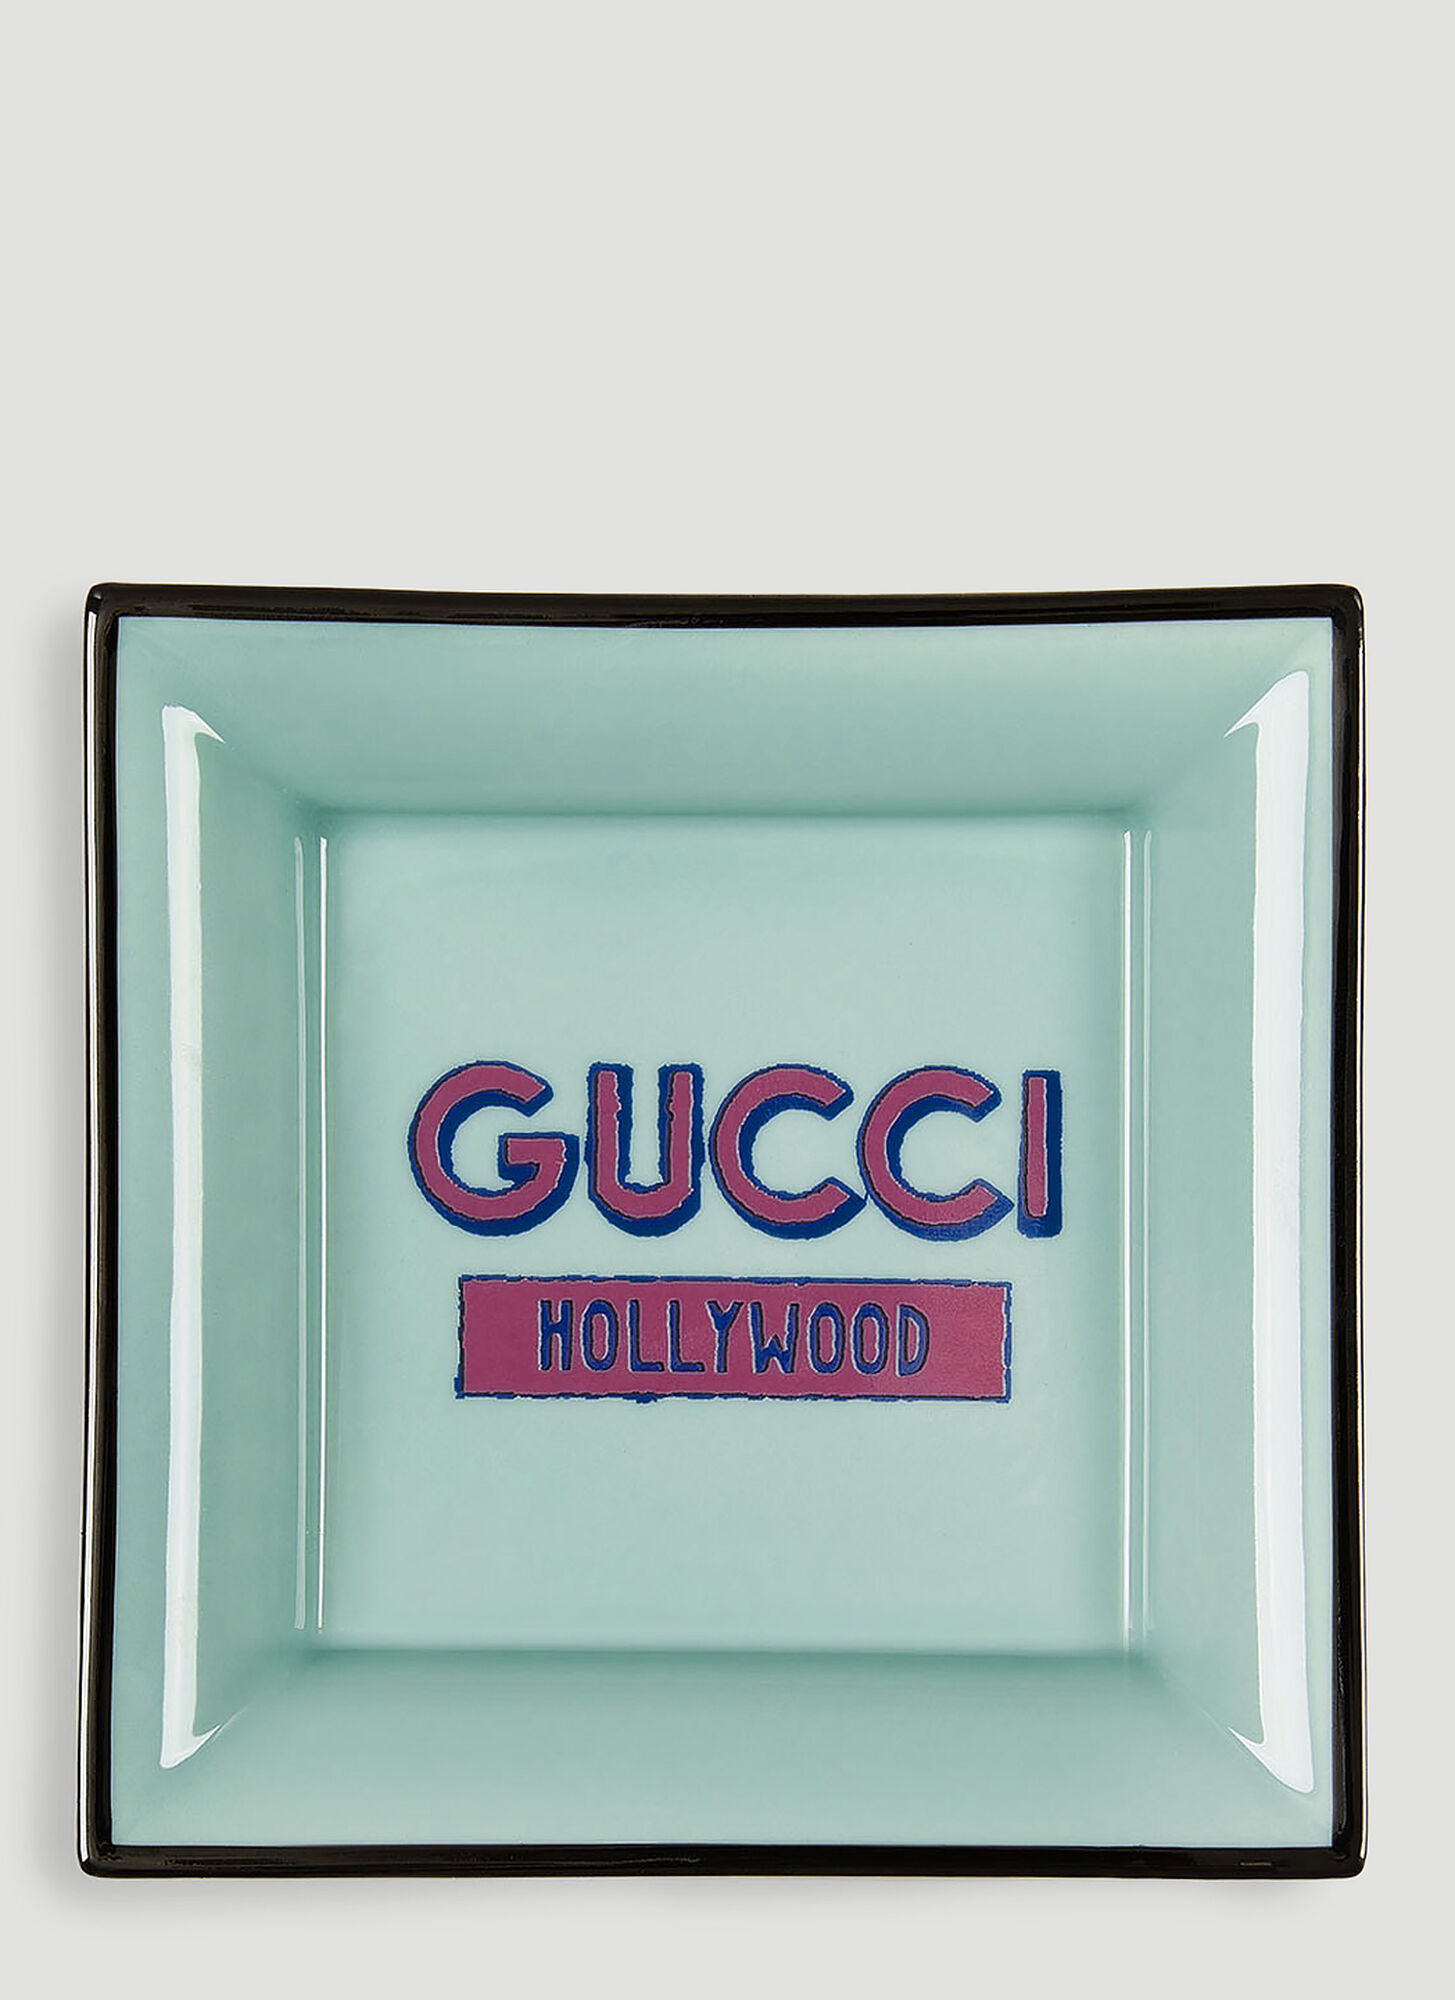 Gucci Hollywood Square Change Tra In Green